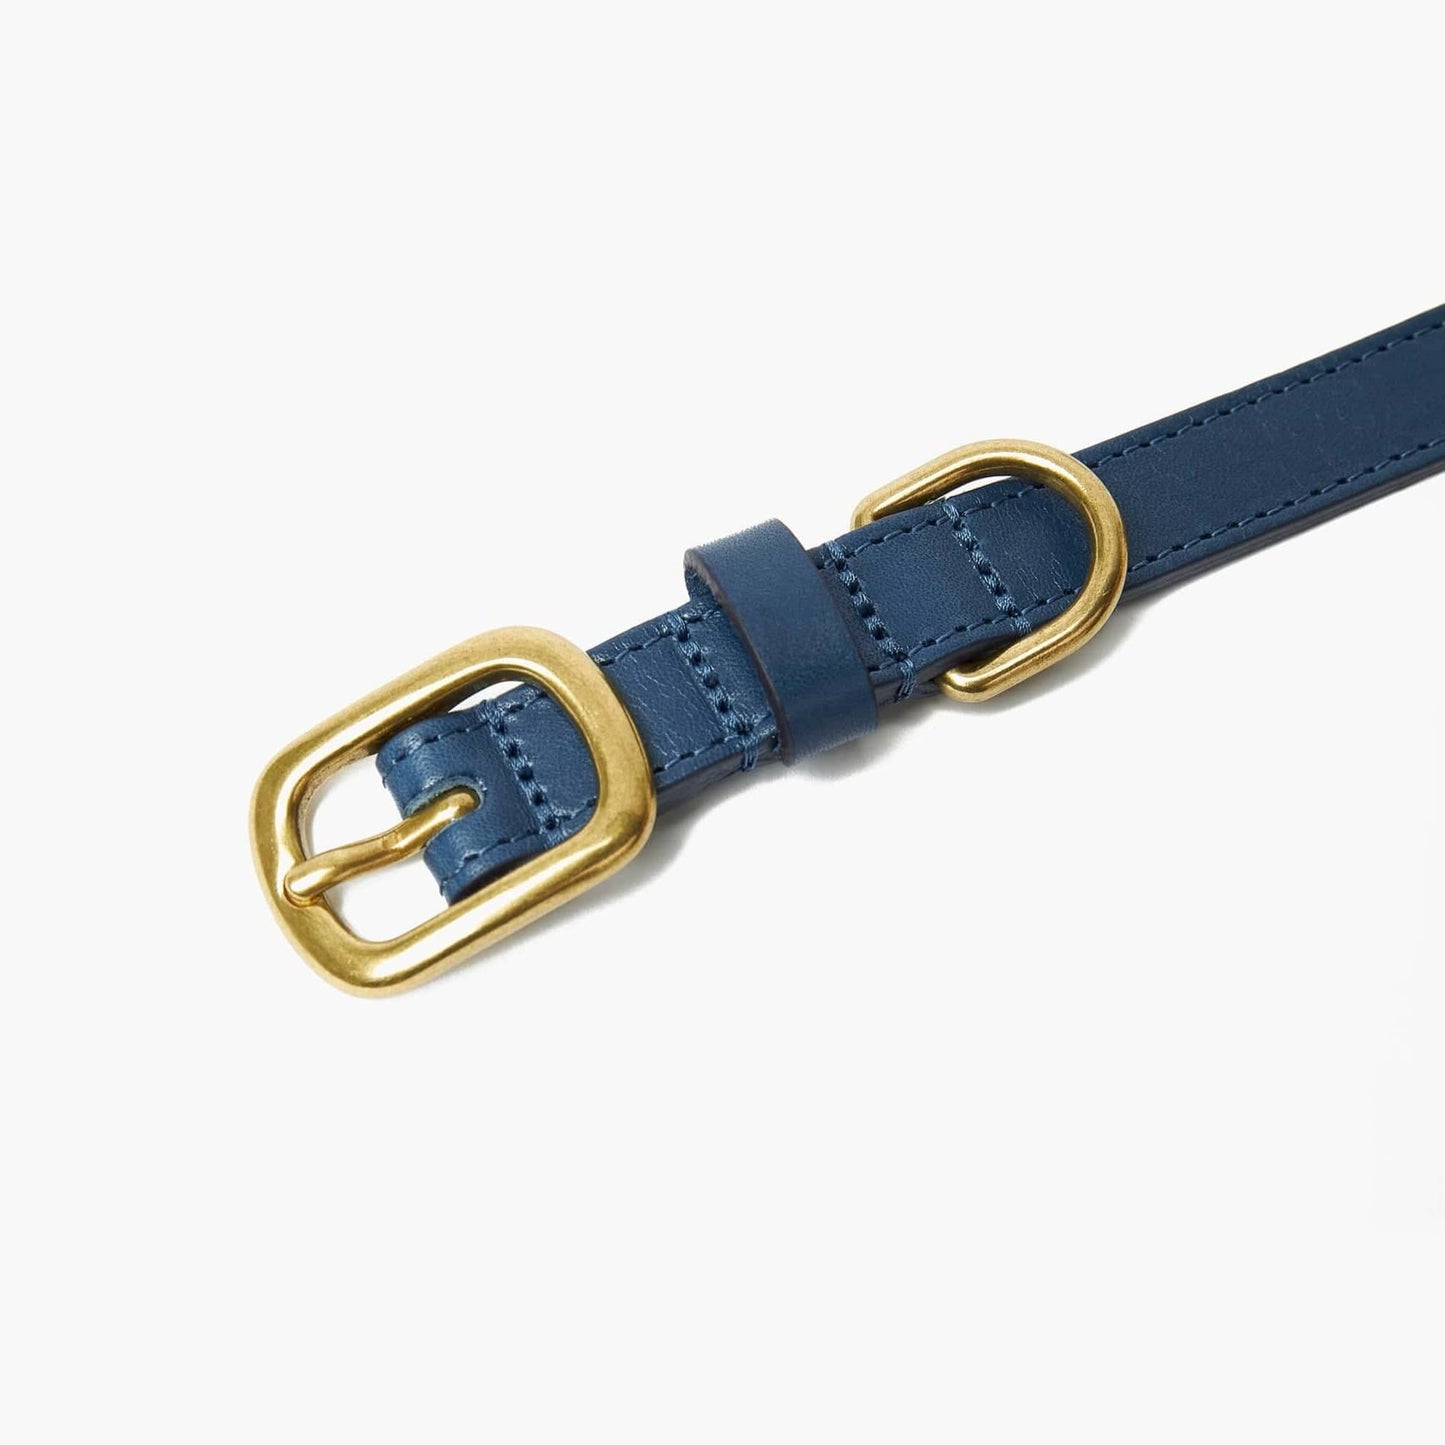 Sapphire Blue Leather Dog Collar & Lead Set with Gold Hardware